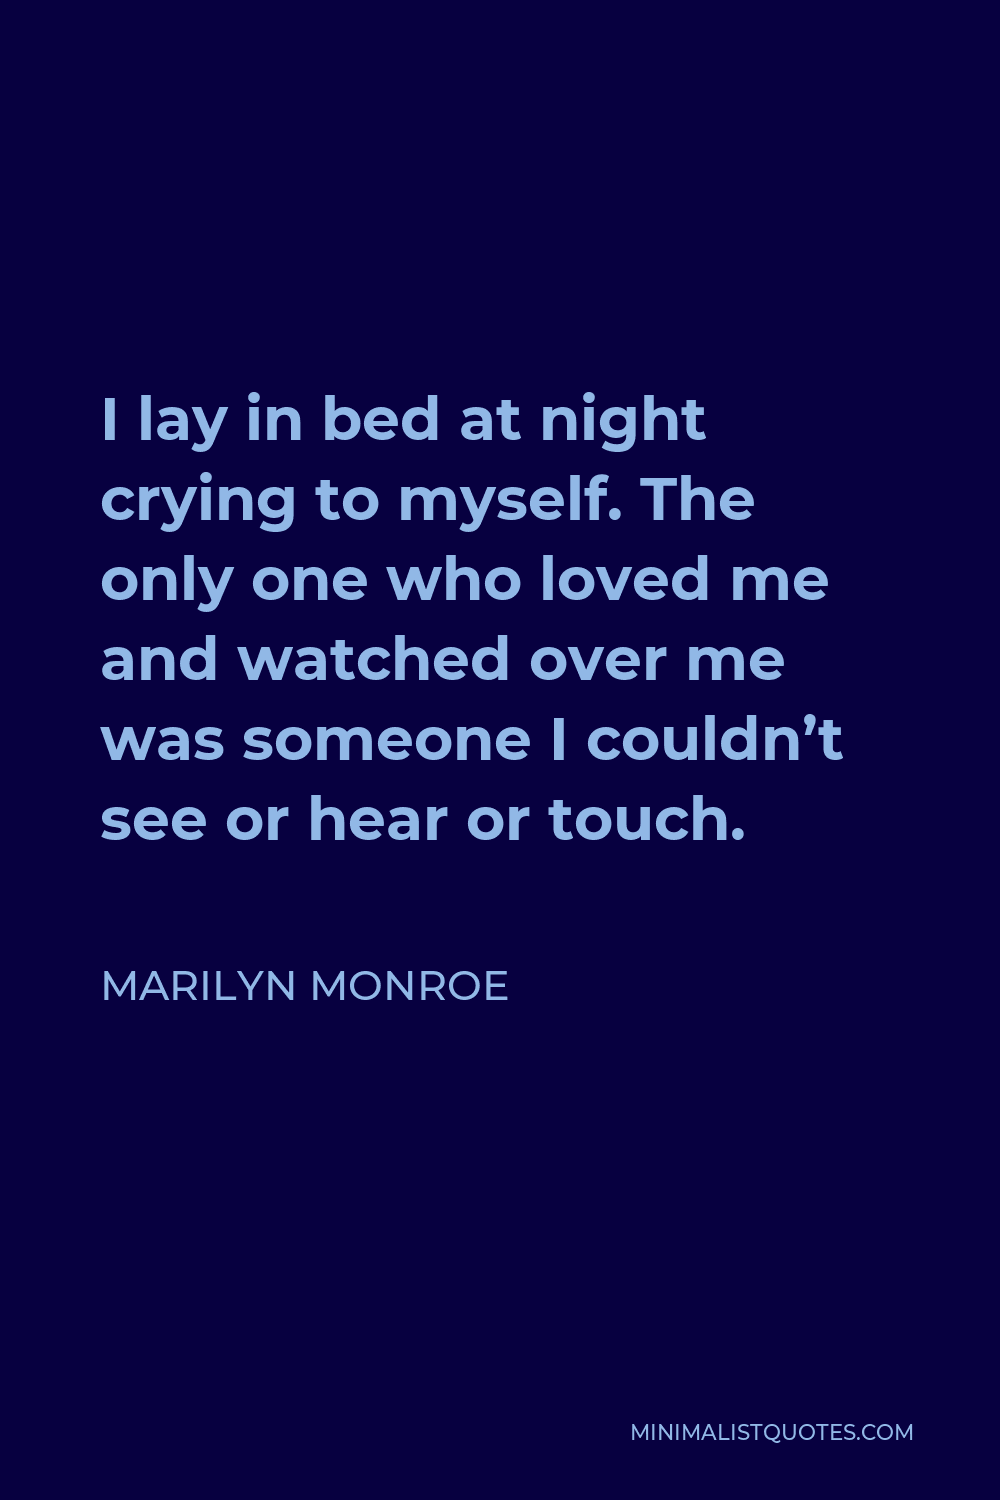 Marilyn Monroe Quote - I lay in bed at night crying to myself. The only one who loved me and watched over me was someone I couldn’t see or hear or touch.